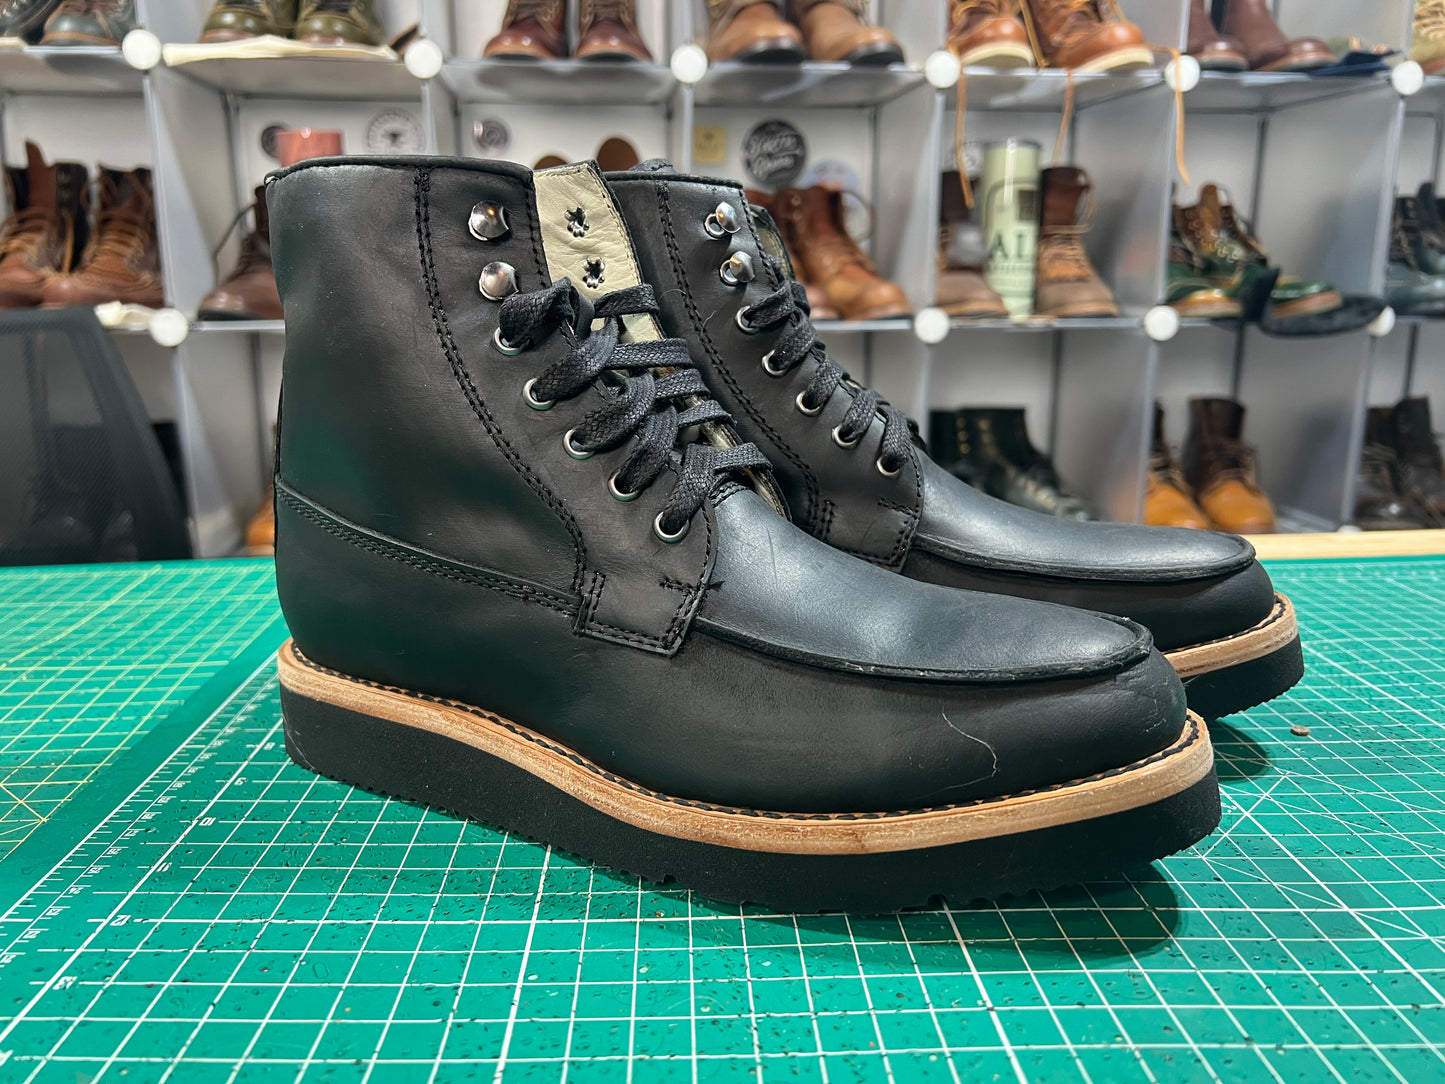 Dievier Nomad Boots in Black Crazy Horse 8.5D – Dale’s Leatherworks